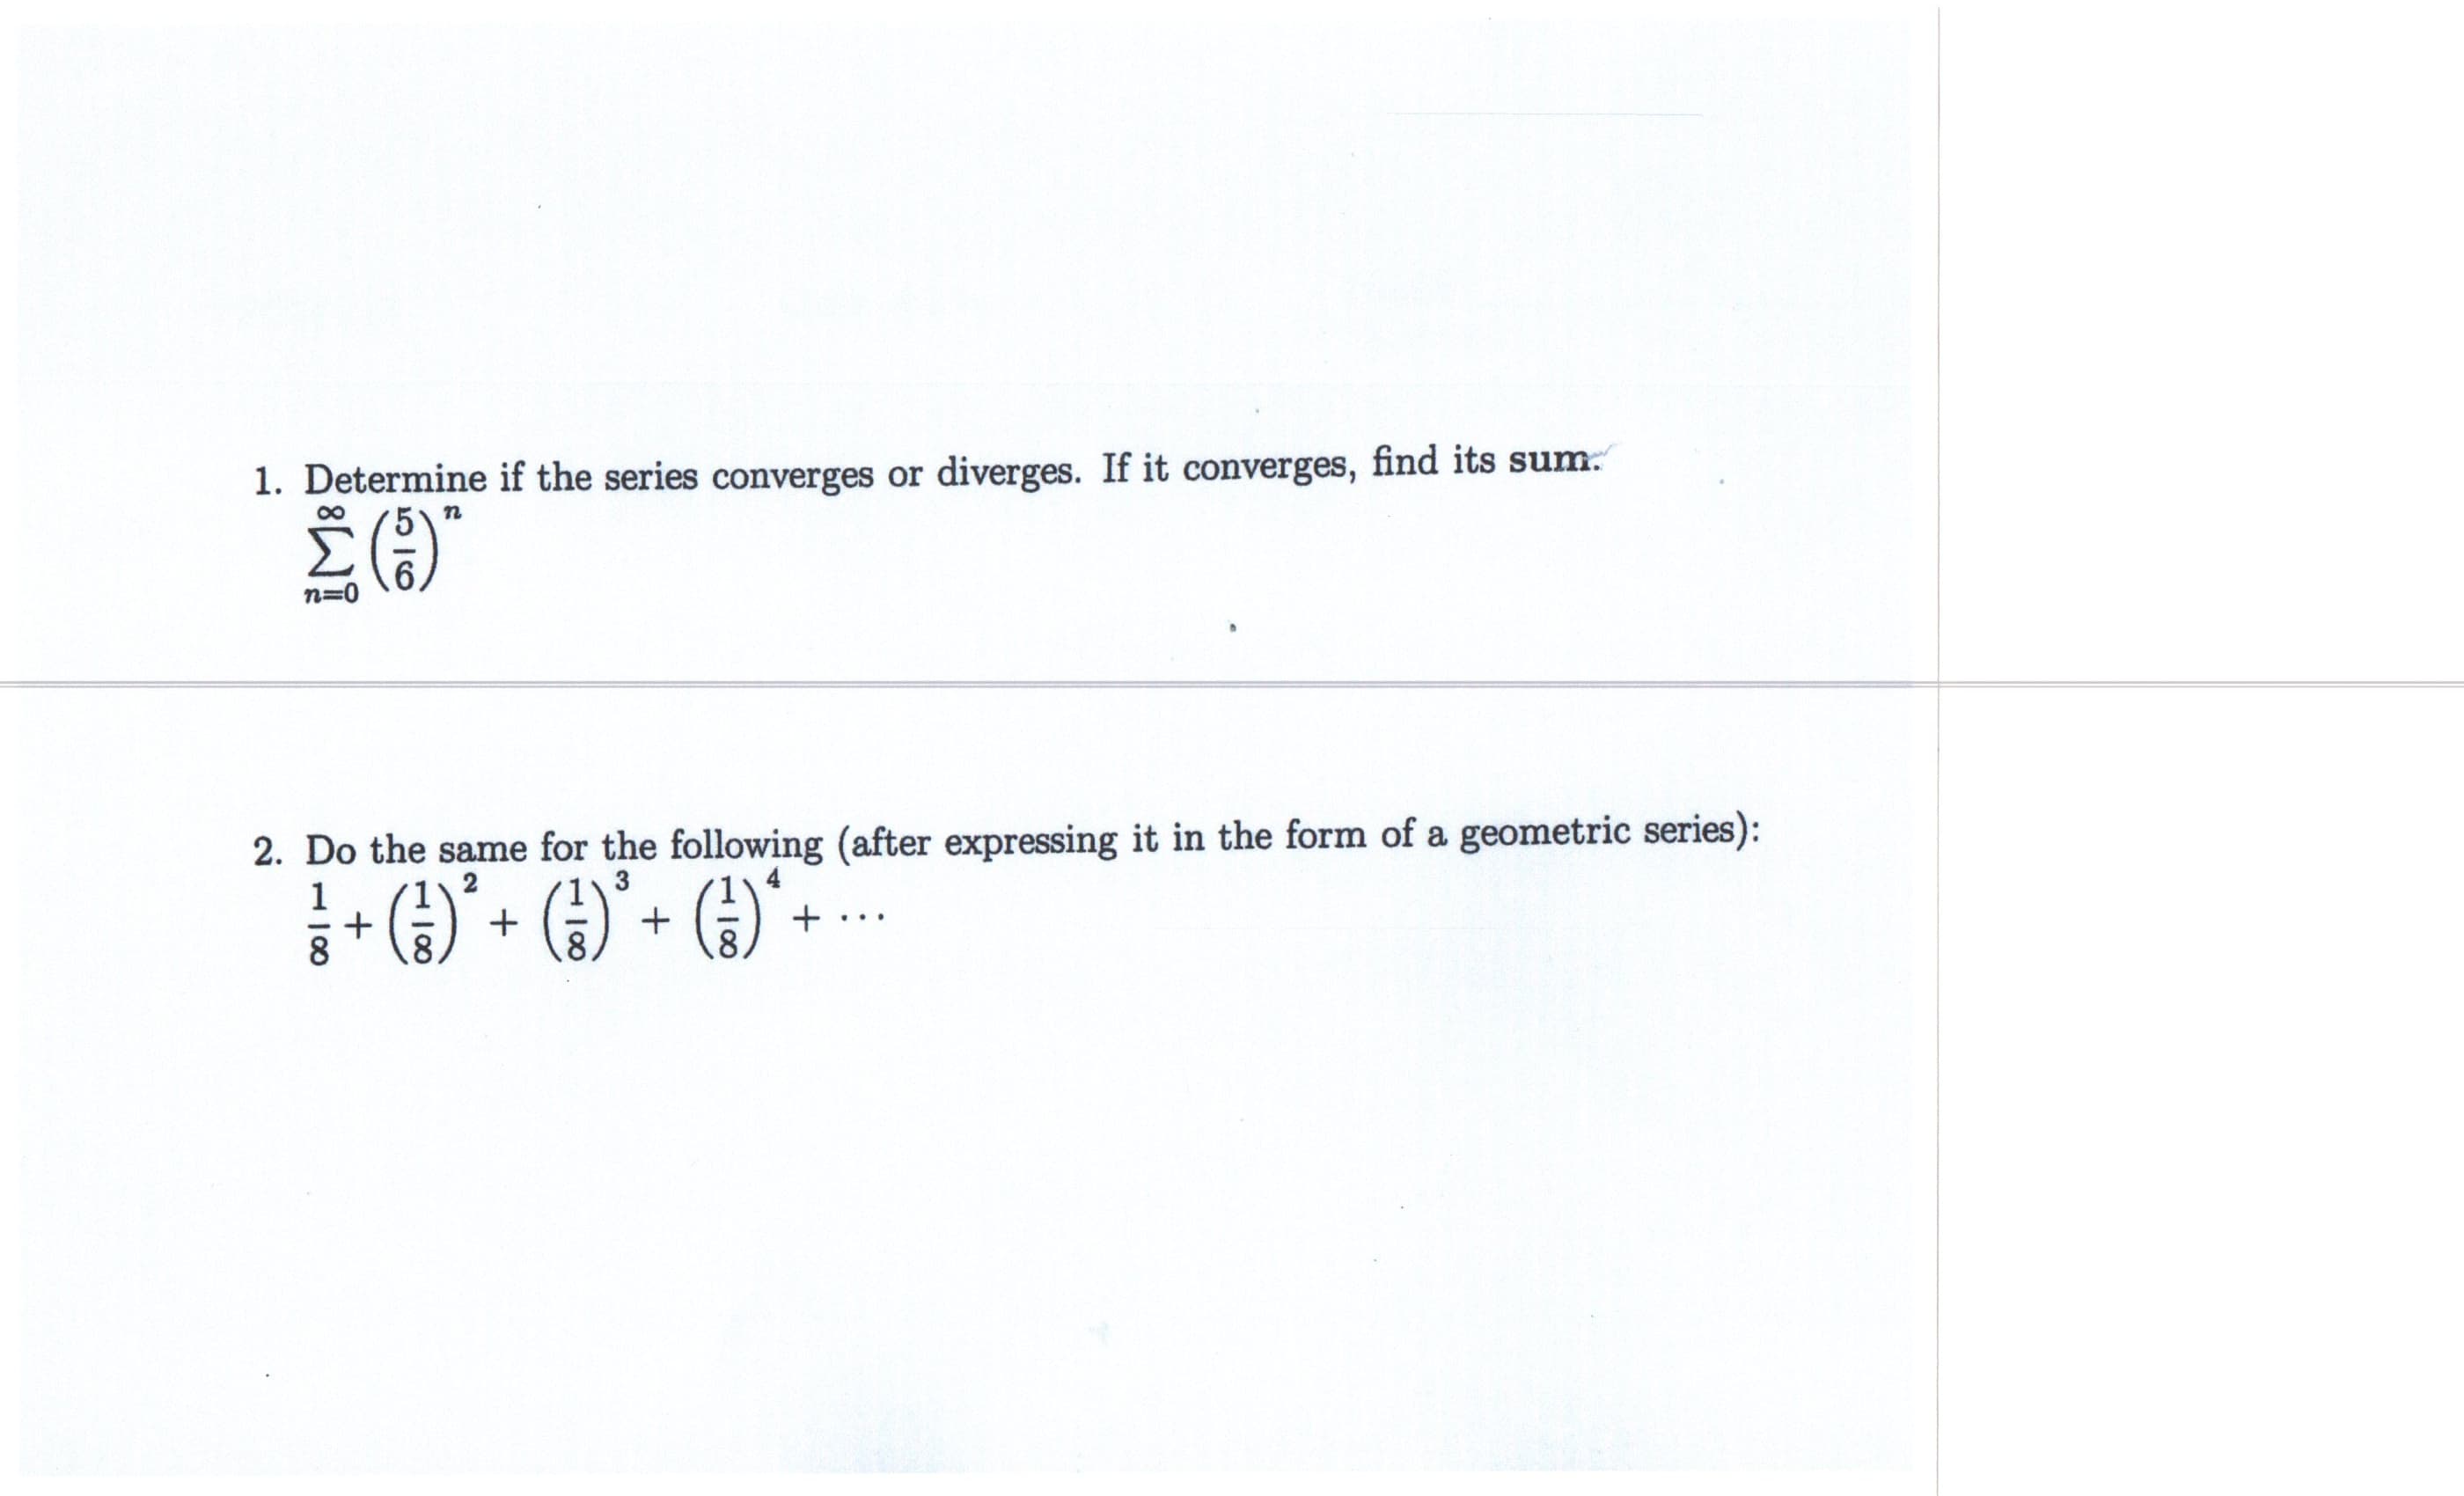 1. Determine if the series converges or diverges. If it converges, find its sum.
n=0
